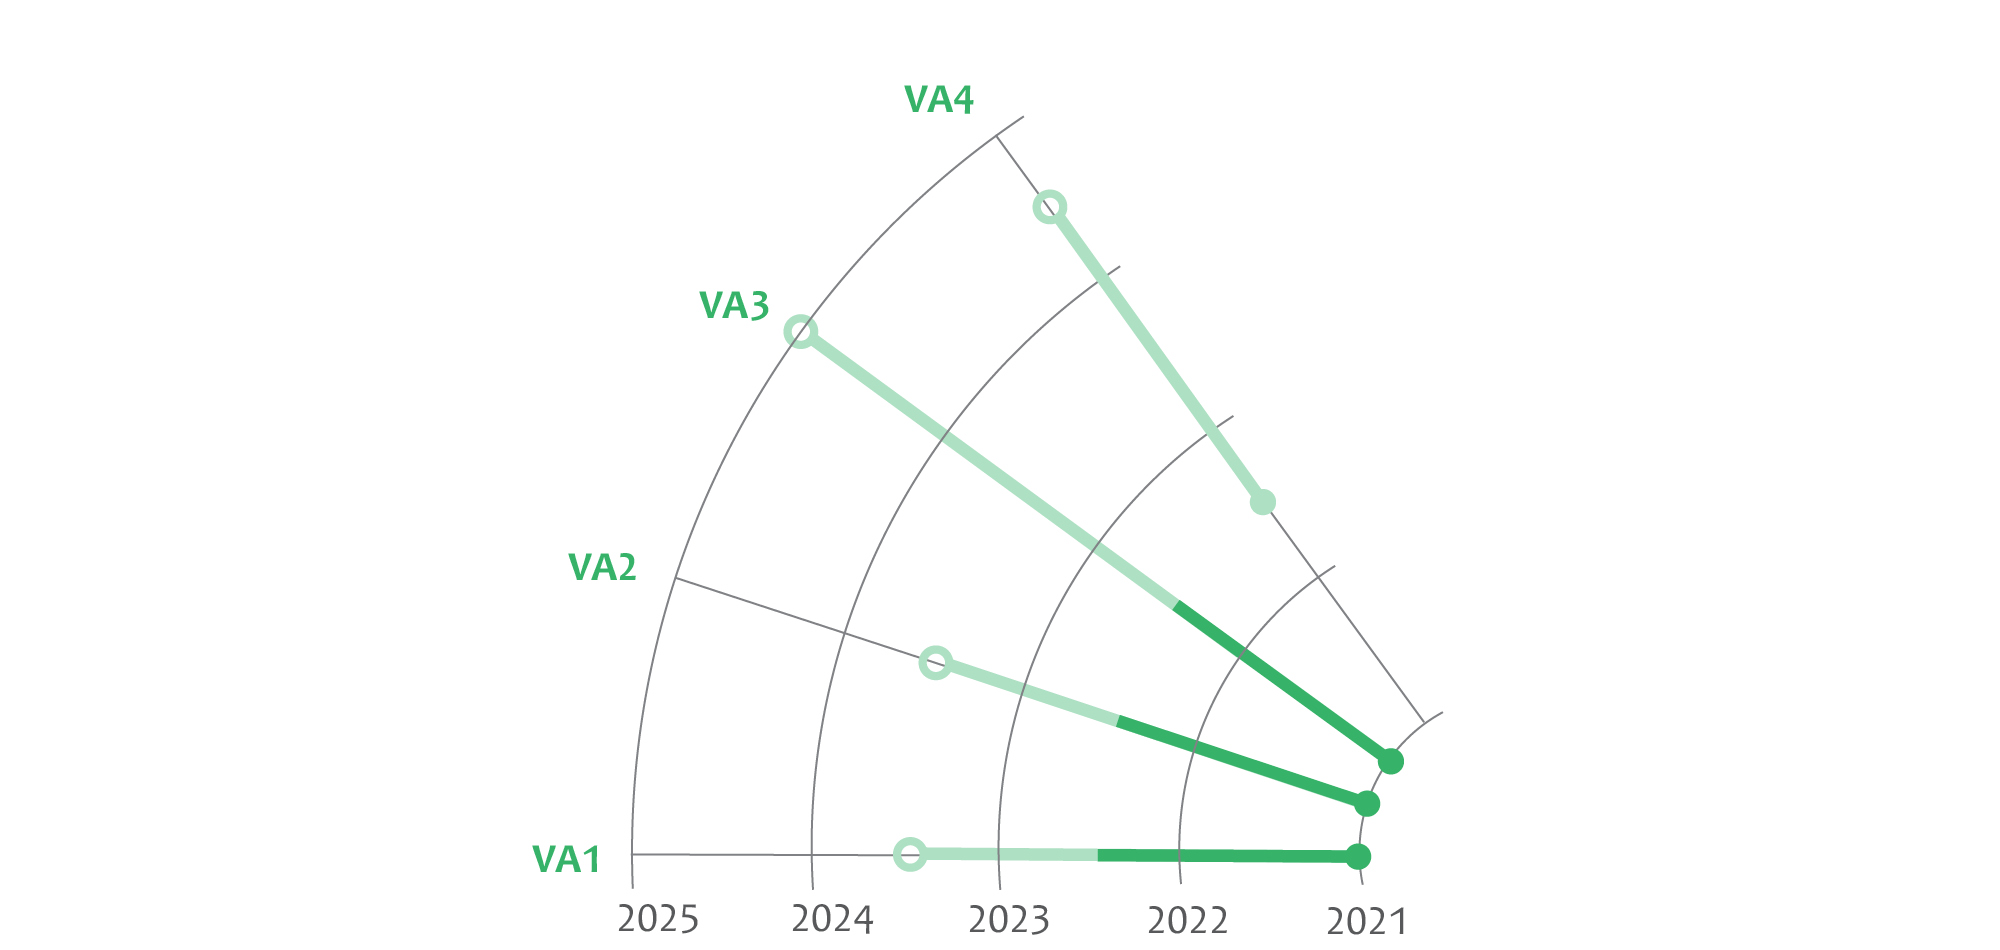 A line chart showing the timeline for HLC's work on its Value goals between 2021 and 2025, described in detail below.